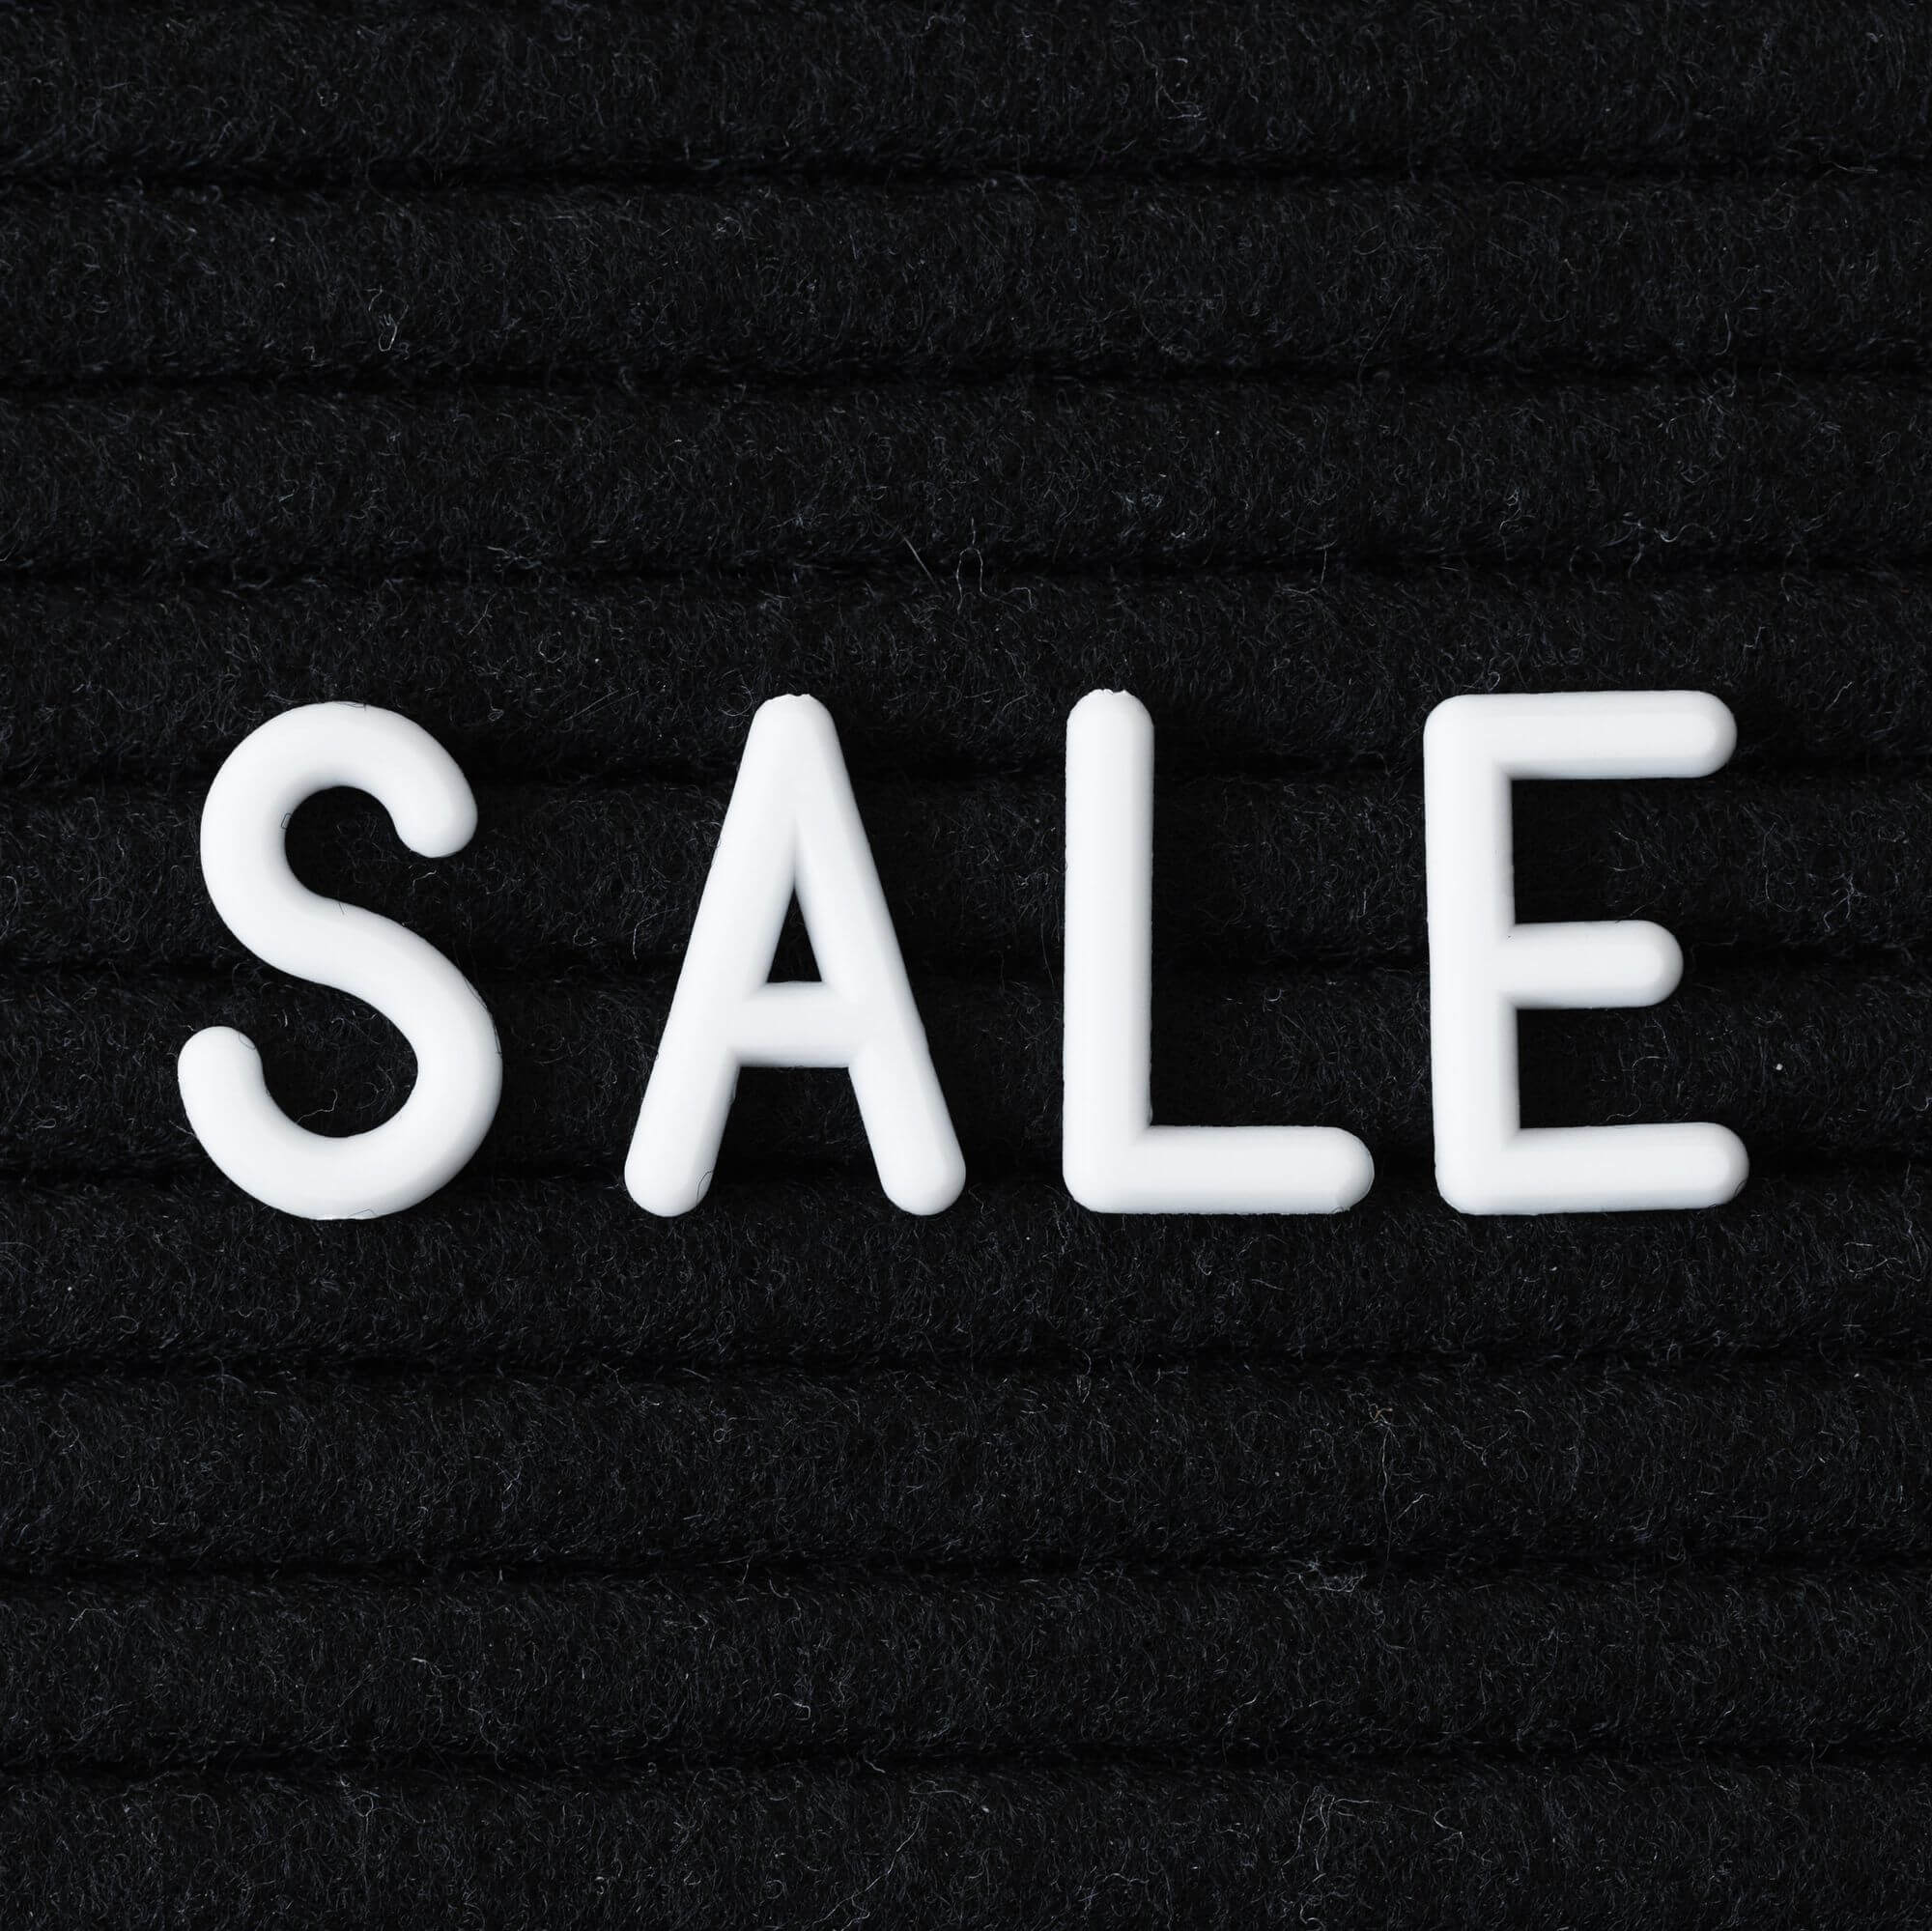 Sale written in white letters on a black background